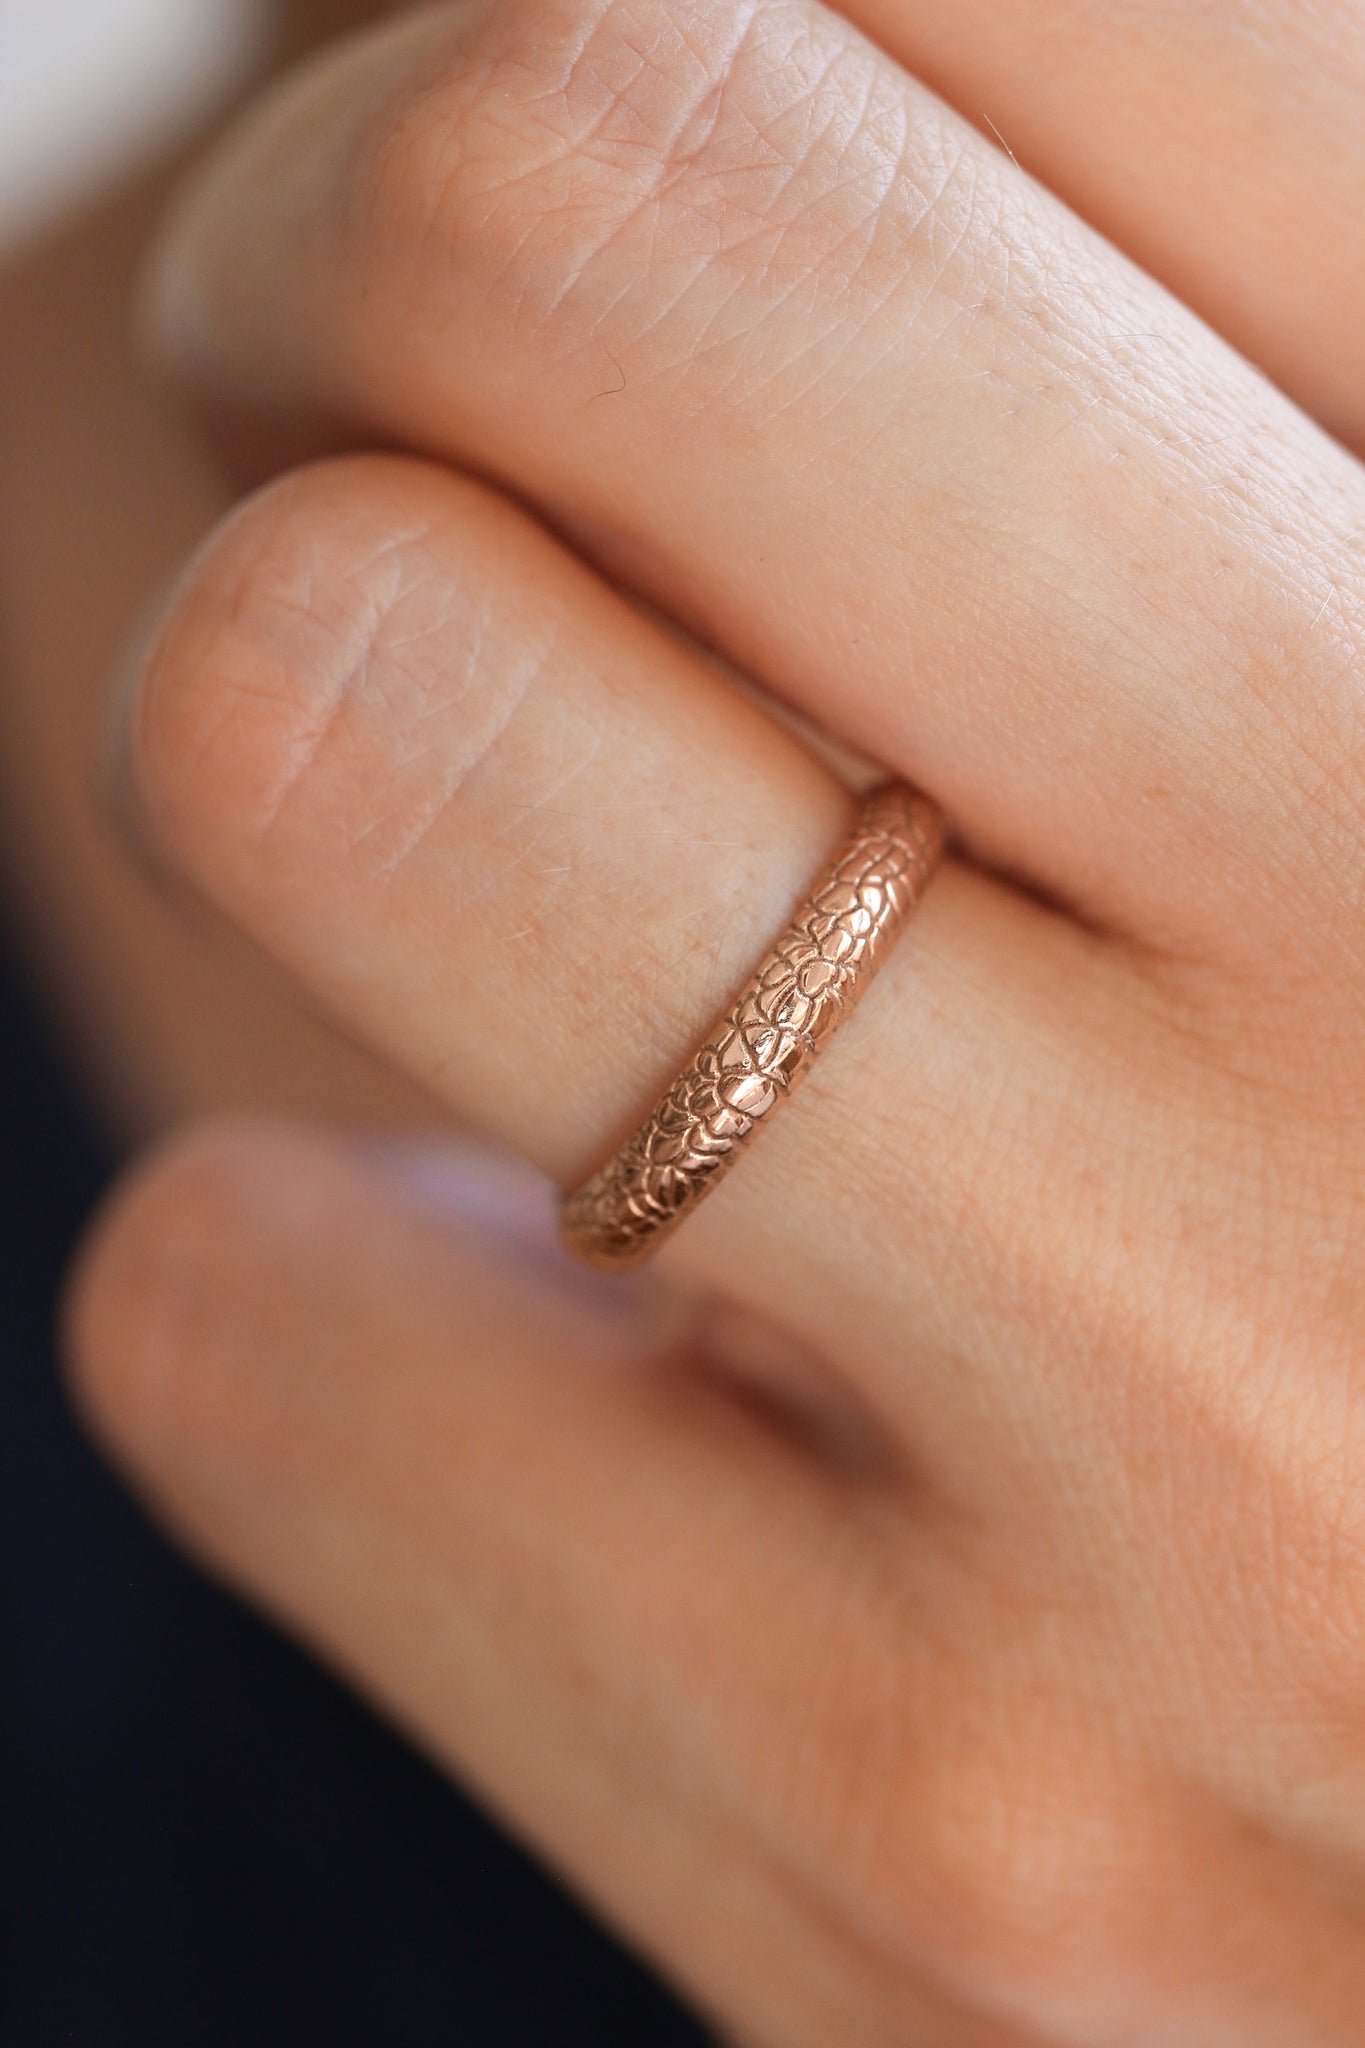 Reptile skin ring, 3 mm wedding band for woman - Eden Garden Jewelry™